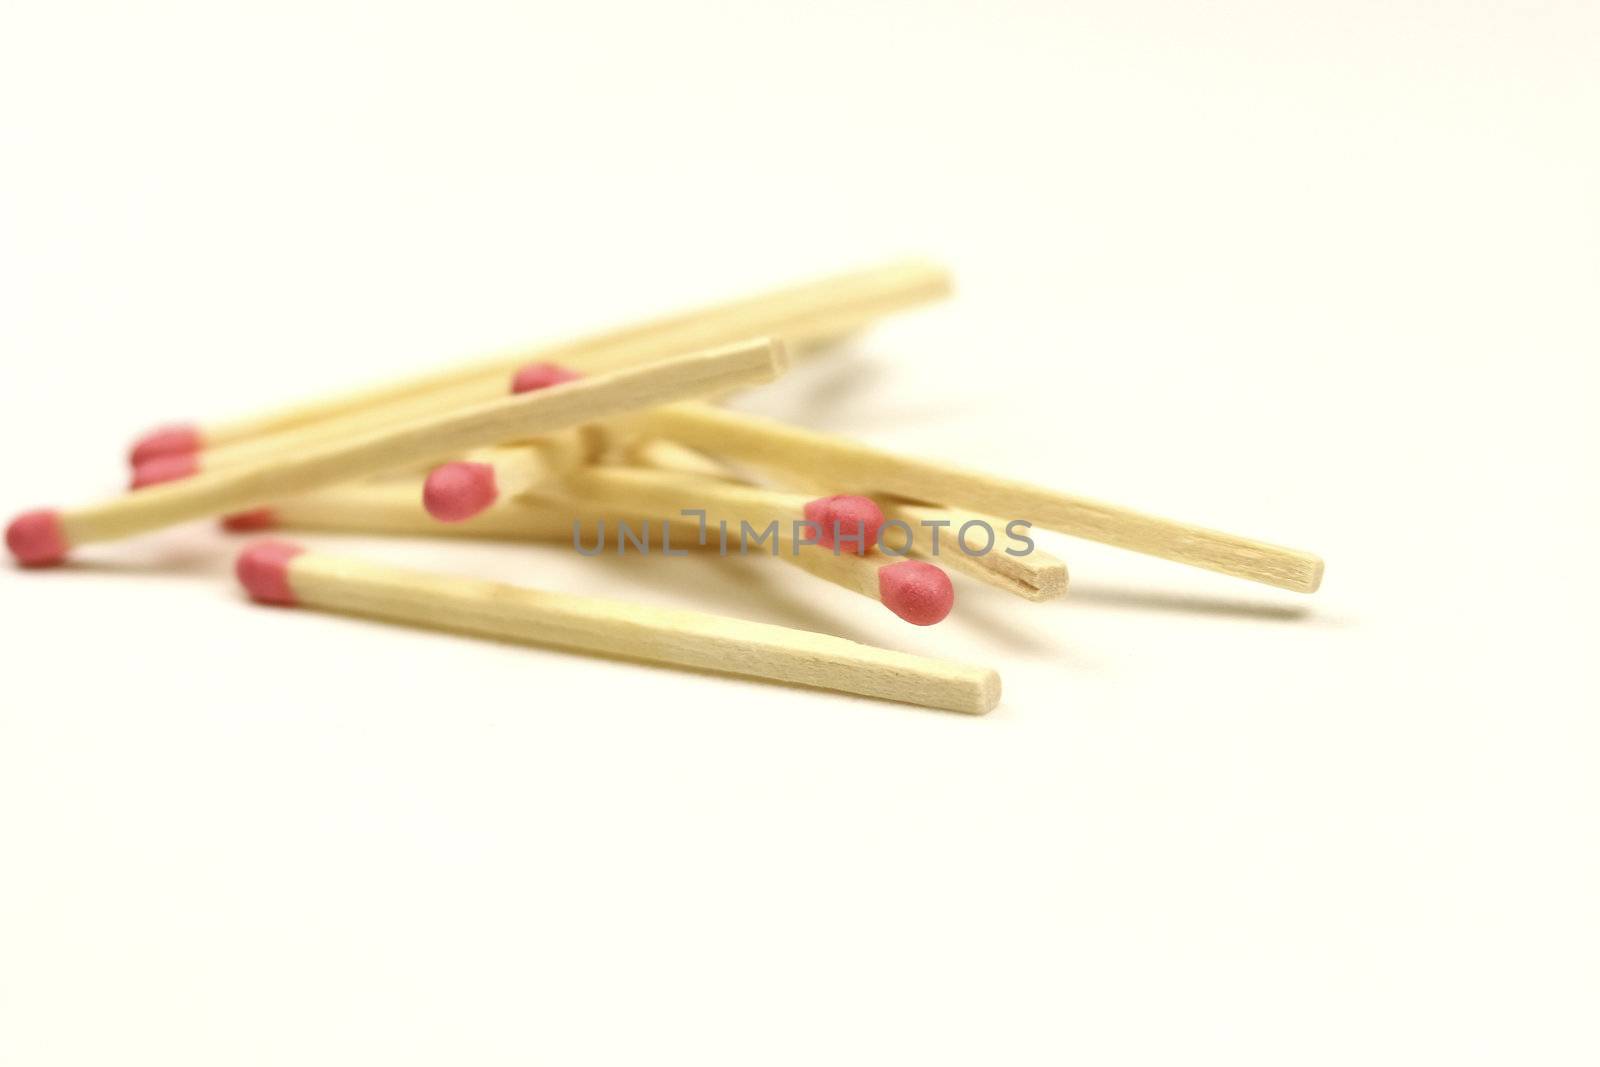 match sticks in a pile on white background